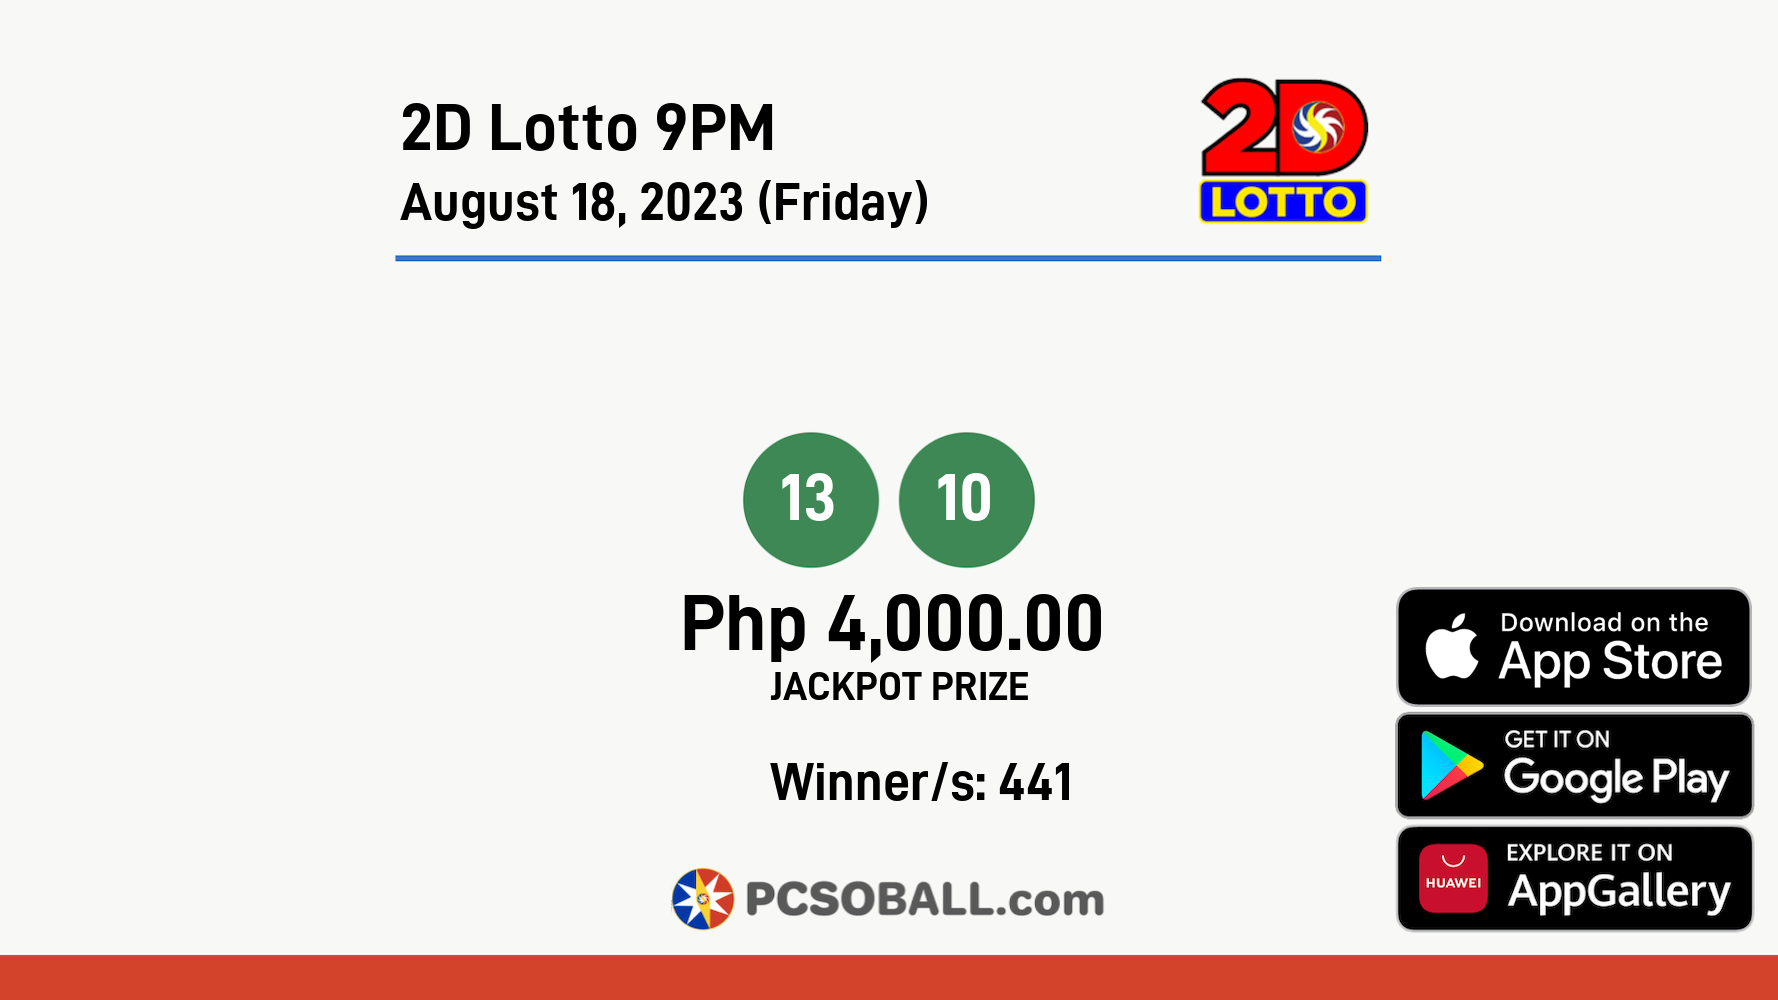 2D Lotto 9PM August 18, 2023 (Friday) Result